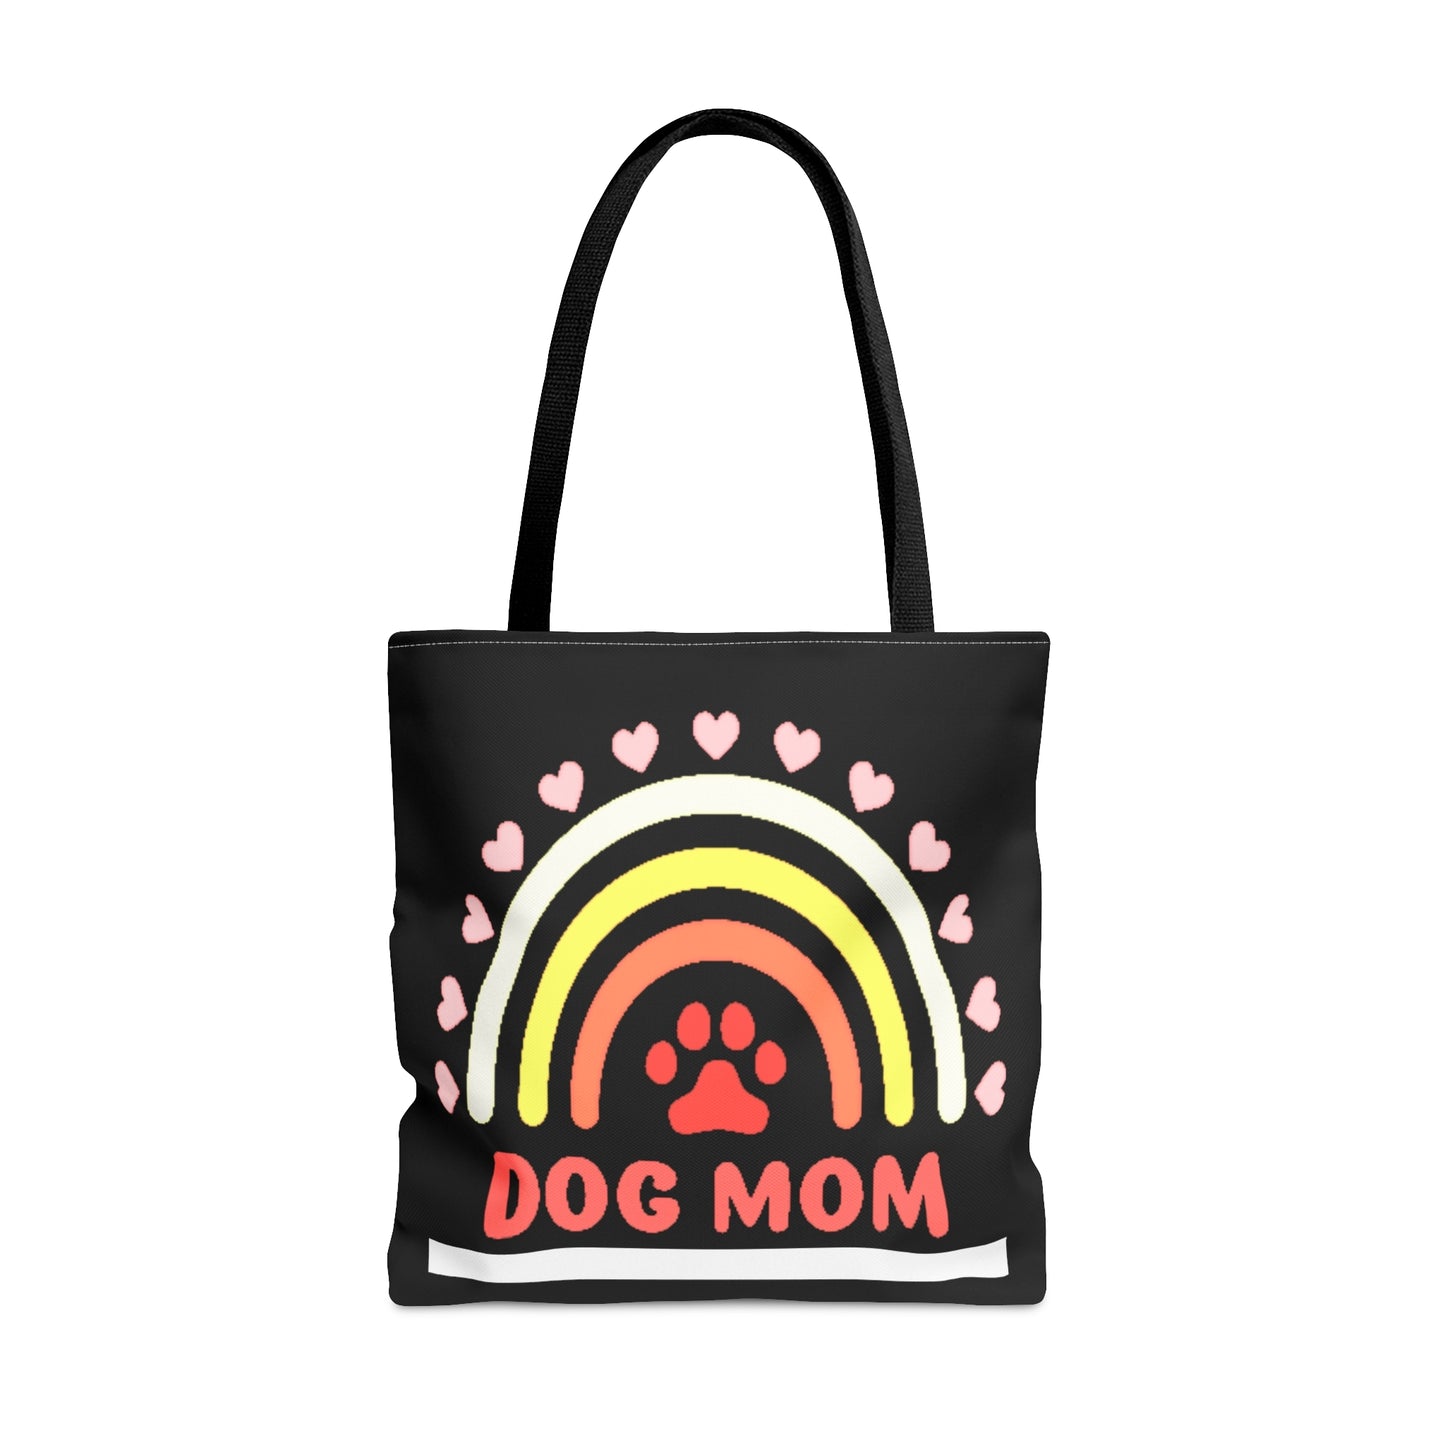 Perfect for Dog Moms, use this Tote Bag to carry everything your lovable doggie needs. Come in 3 sizes to meet your needs. Reusable for all your shopping or trip needs.